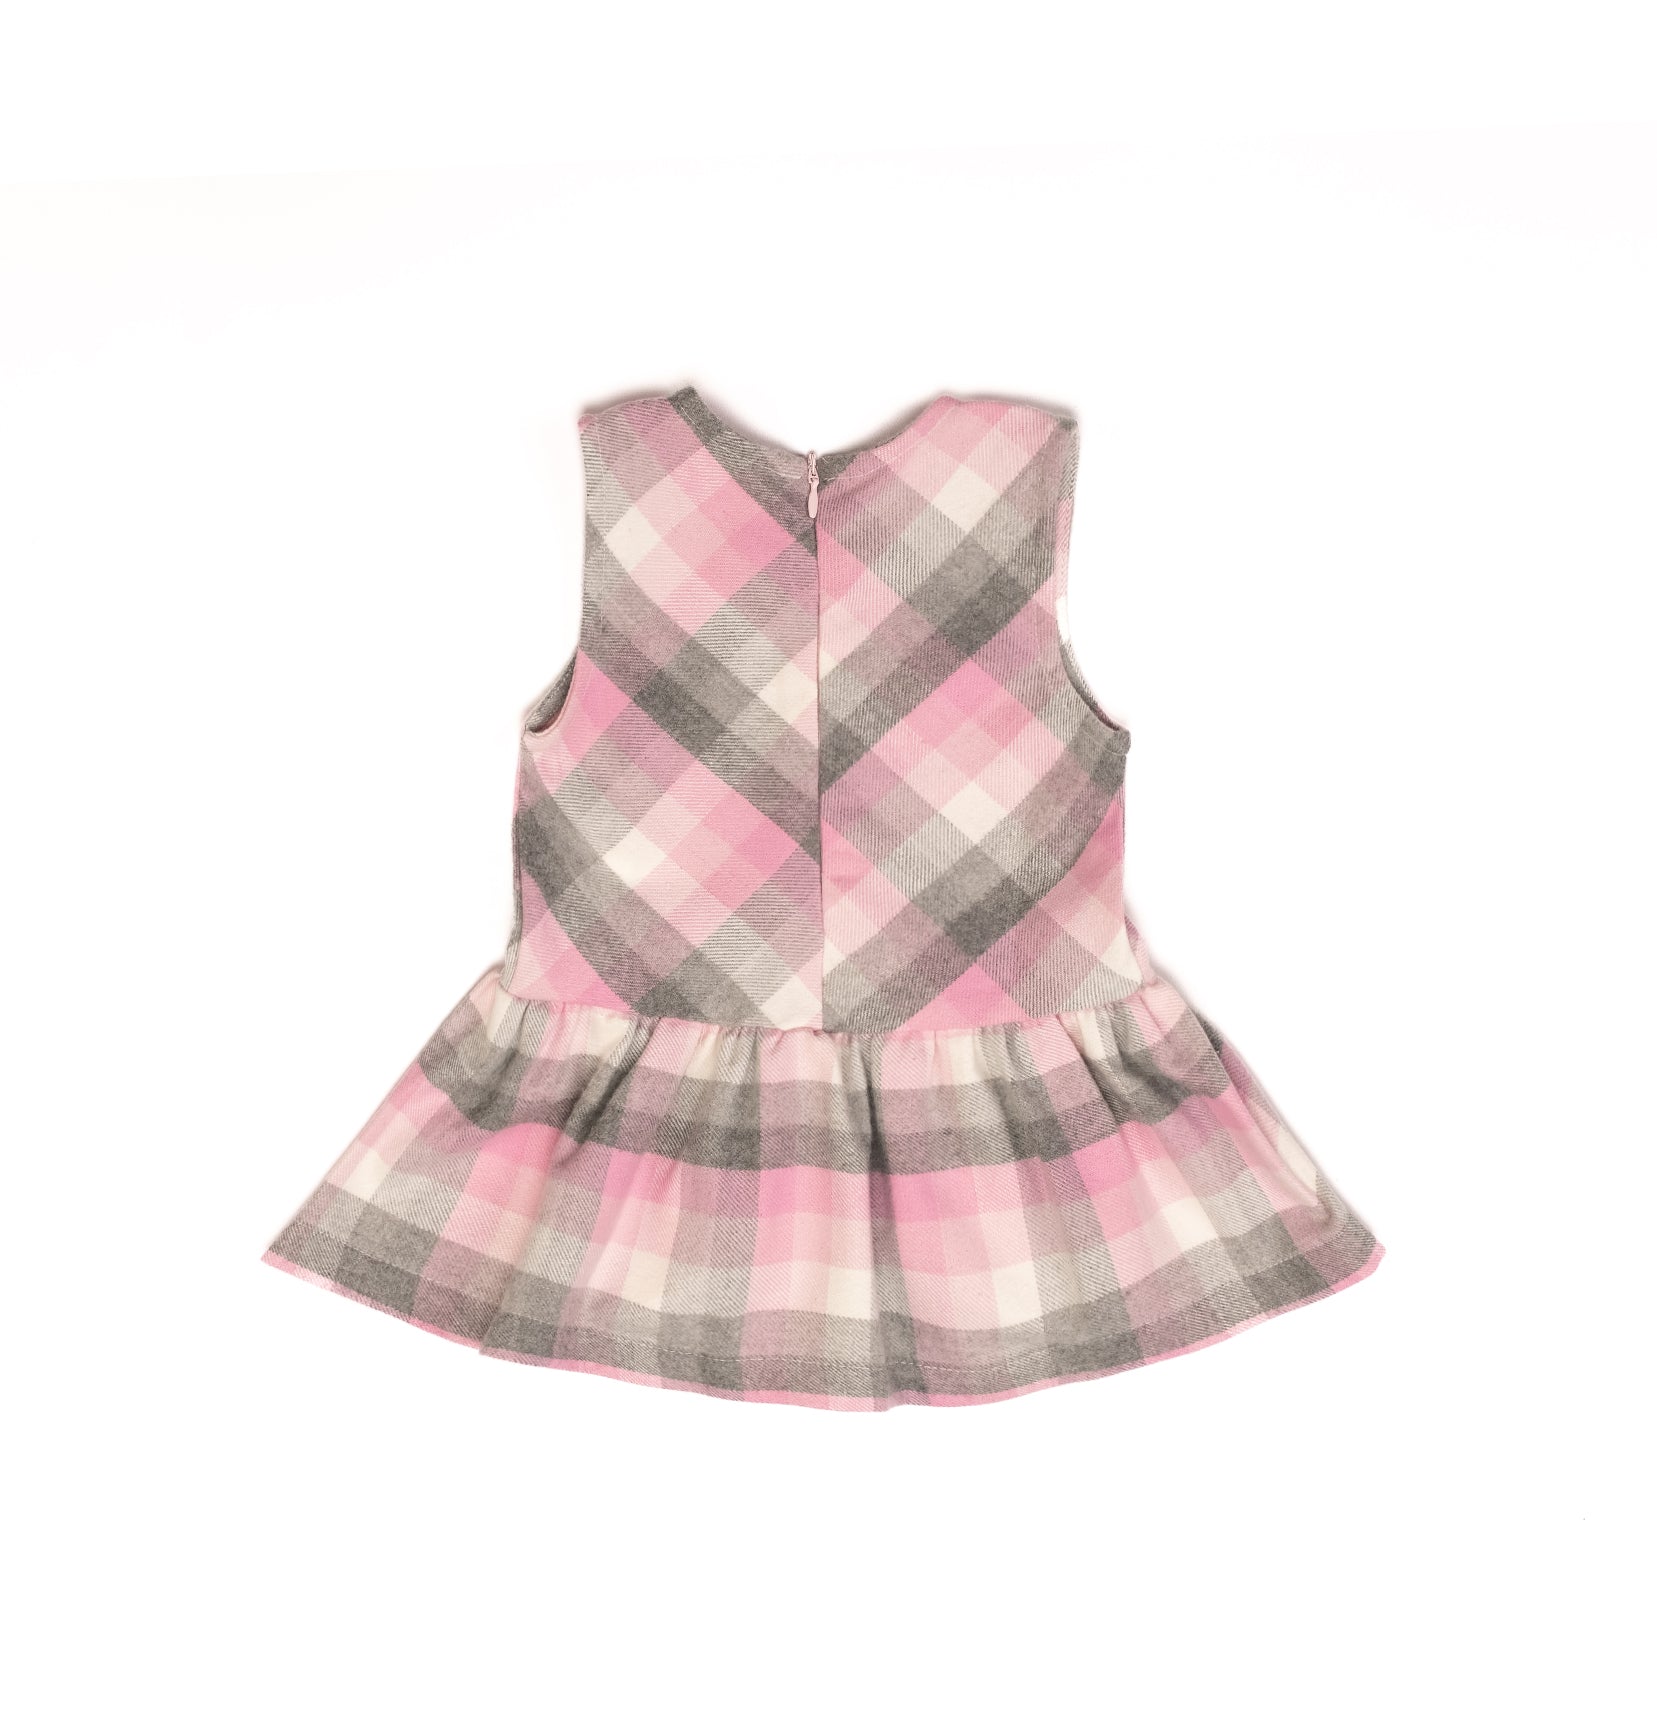 Fashionable short baby girl dress by Pompelo